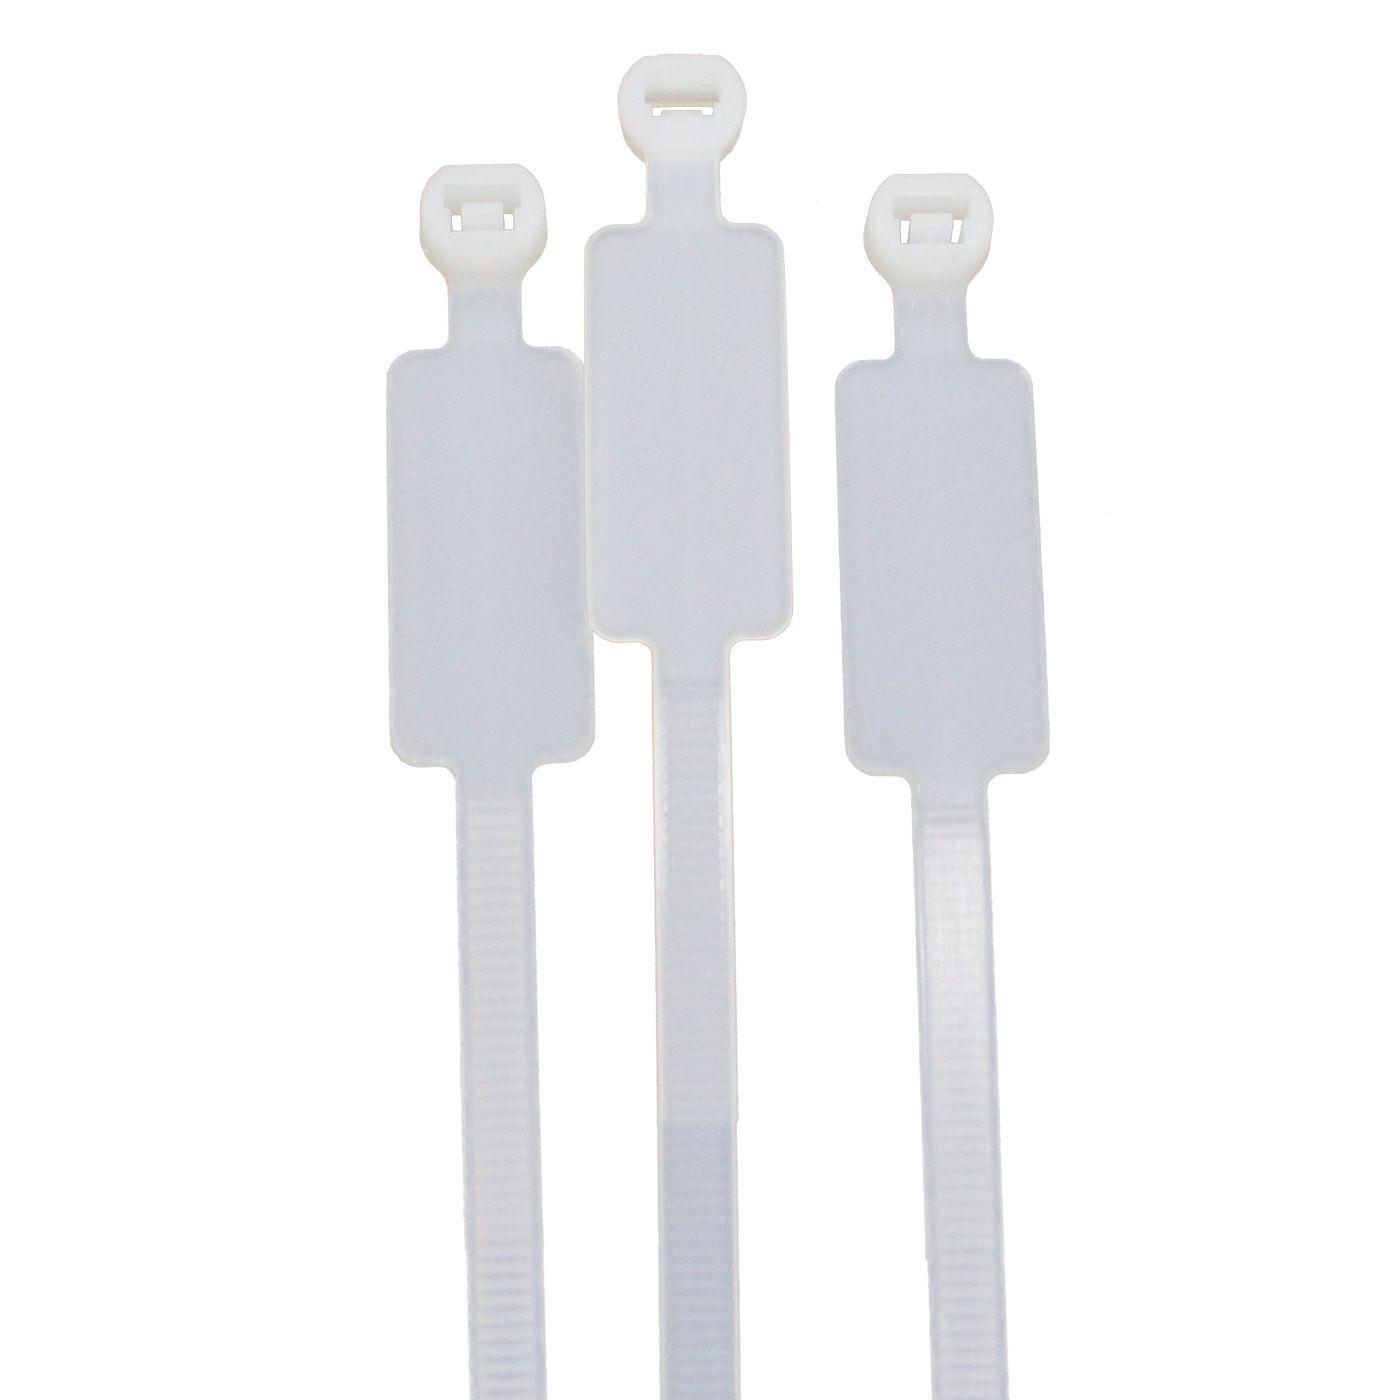 100x Cable tie with Text label 27x12mm 200 x 4,8mm White Natural 22kg PA6.6 Polyamide Industrial quality